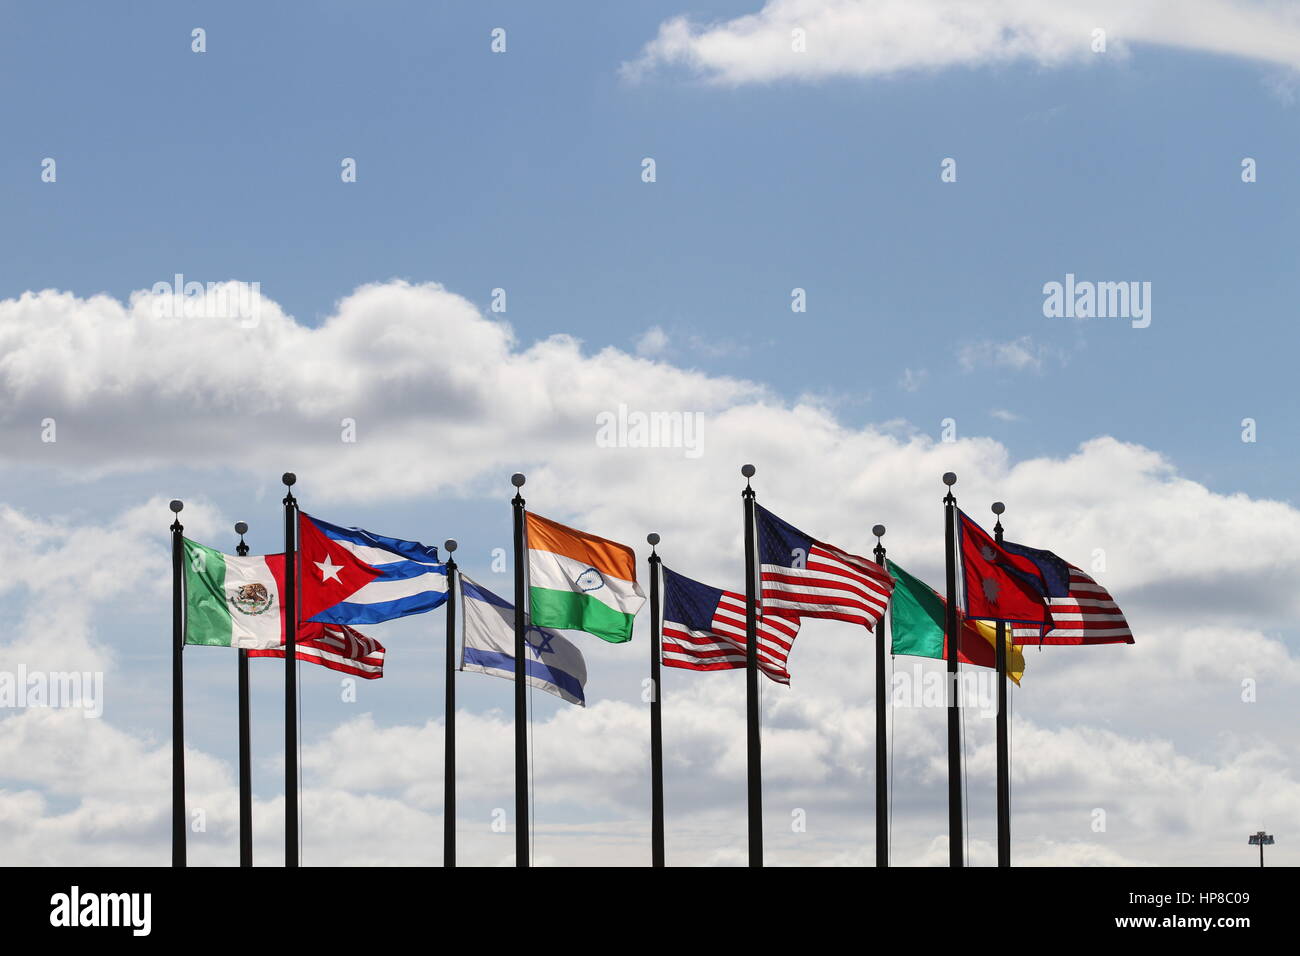 The flags US, Nepal, Cameroon,  Israel, India, Mexico and Cuba on a flagpoles blowing in the wind against a blue sky and white clouds. The wind blows. Stock Photo